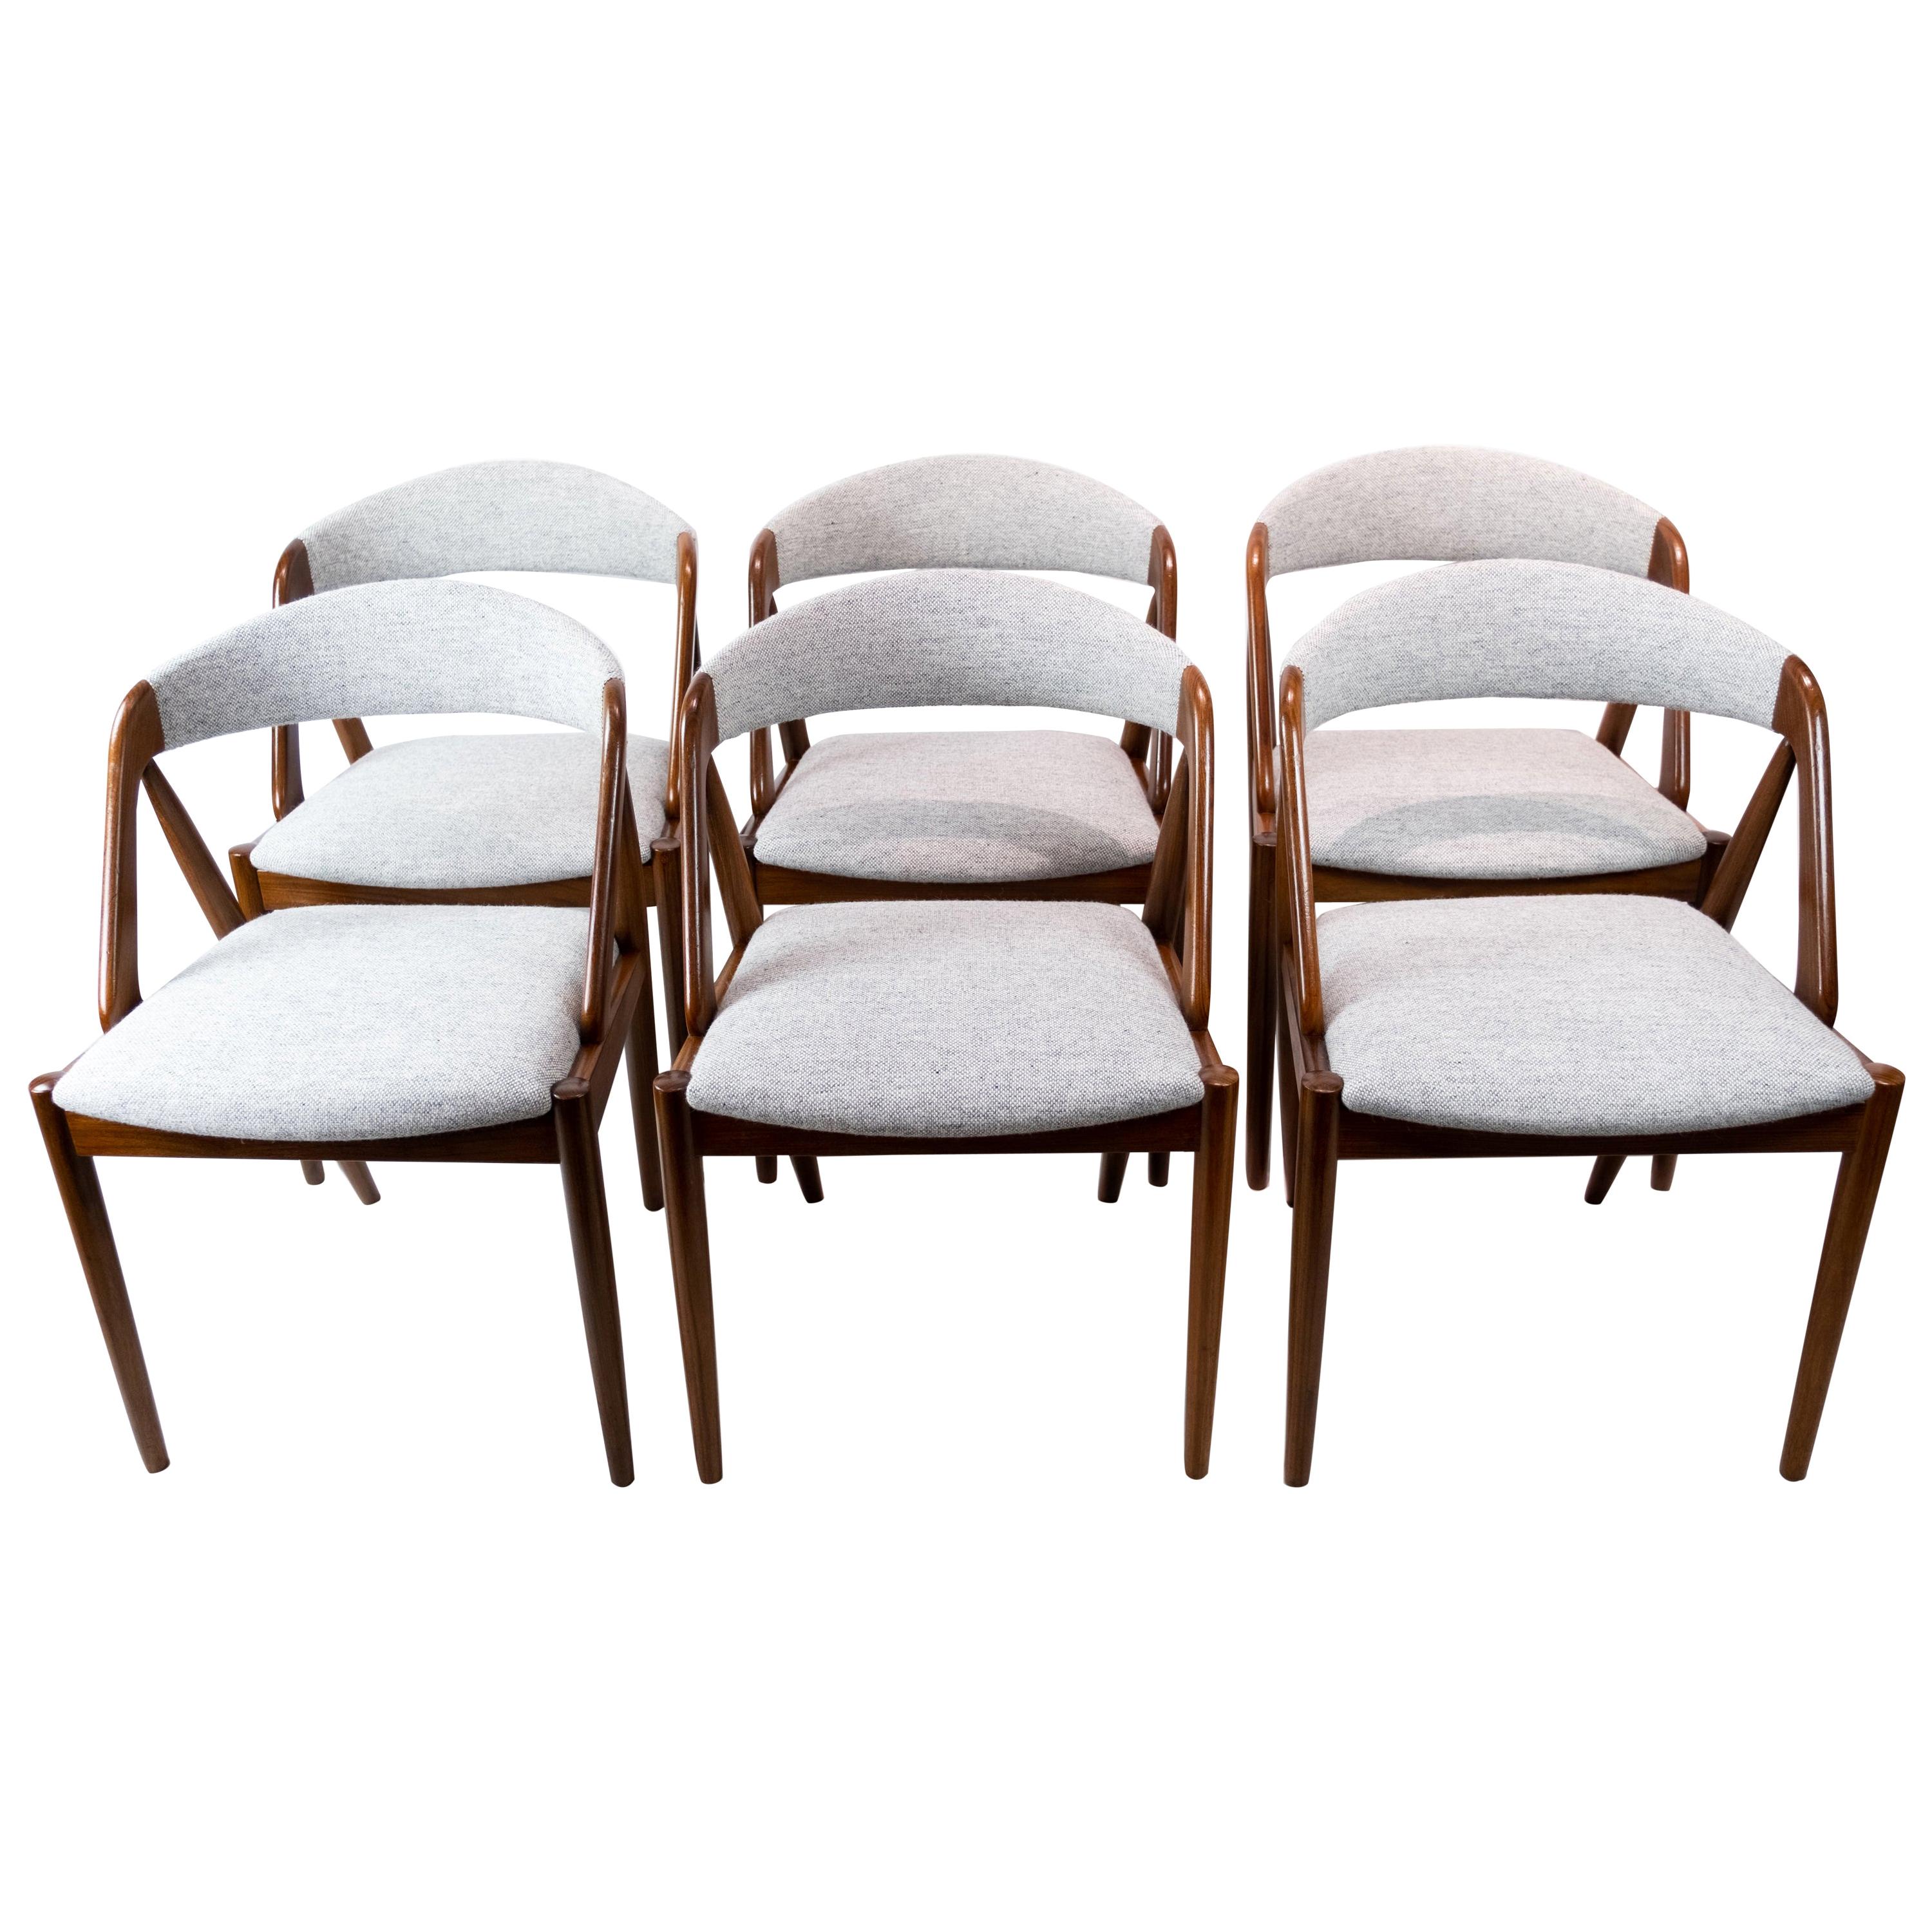 Set of Six Dining Room Chairs, Model 31, Designed by Kai Kristiansen